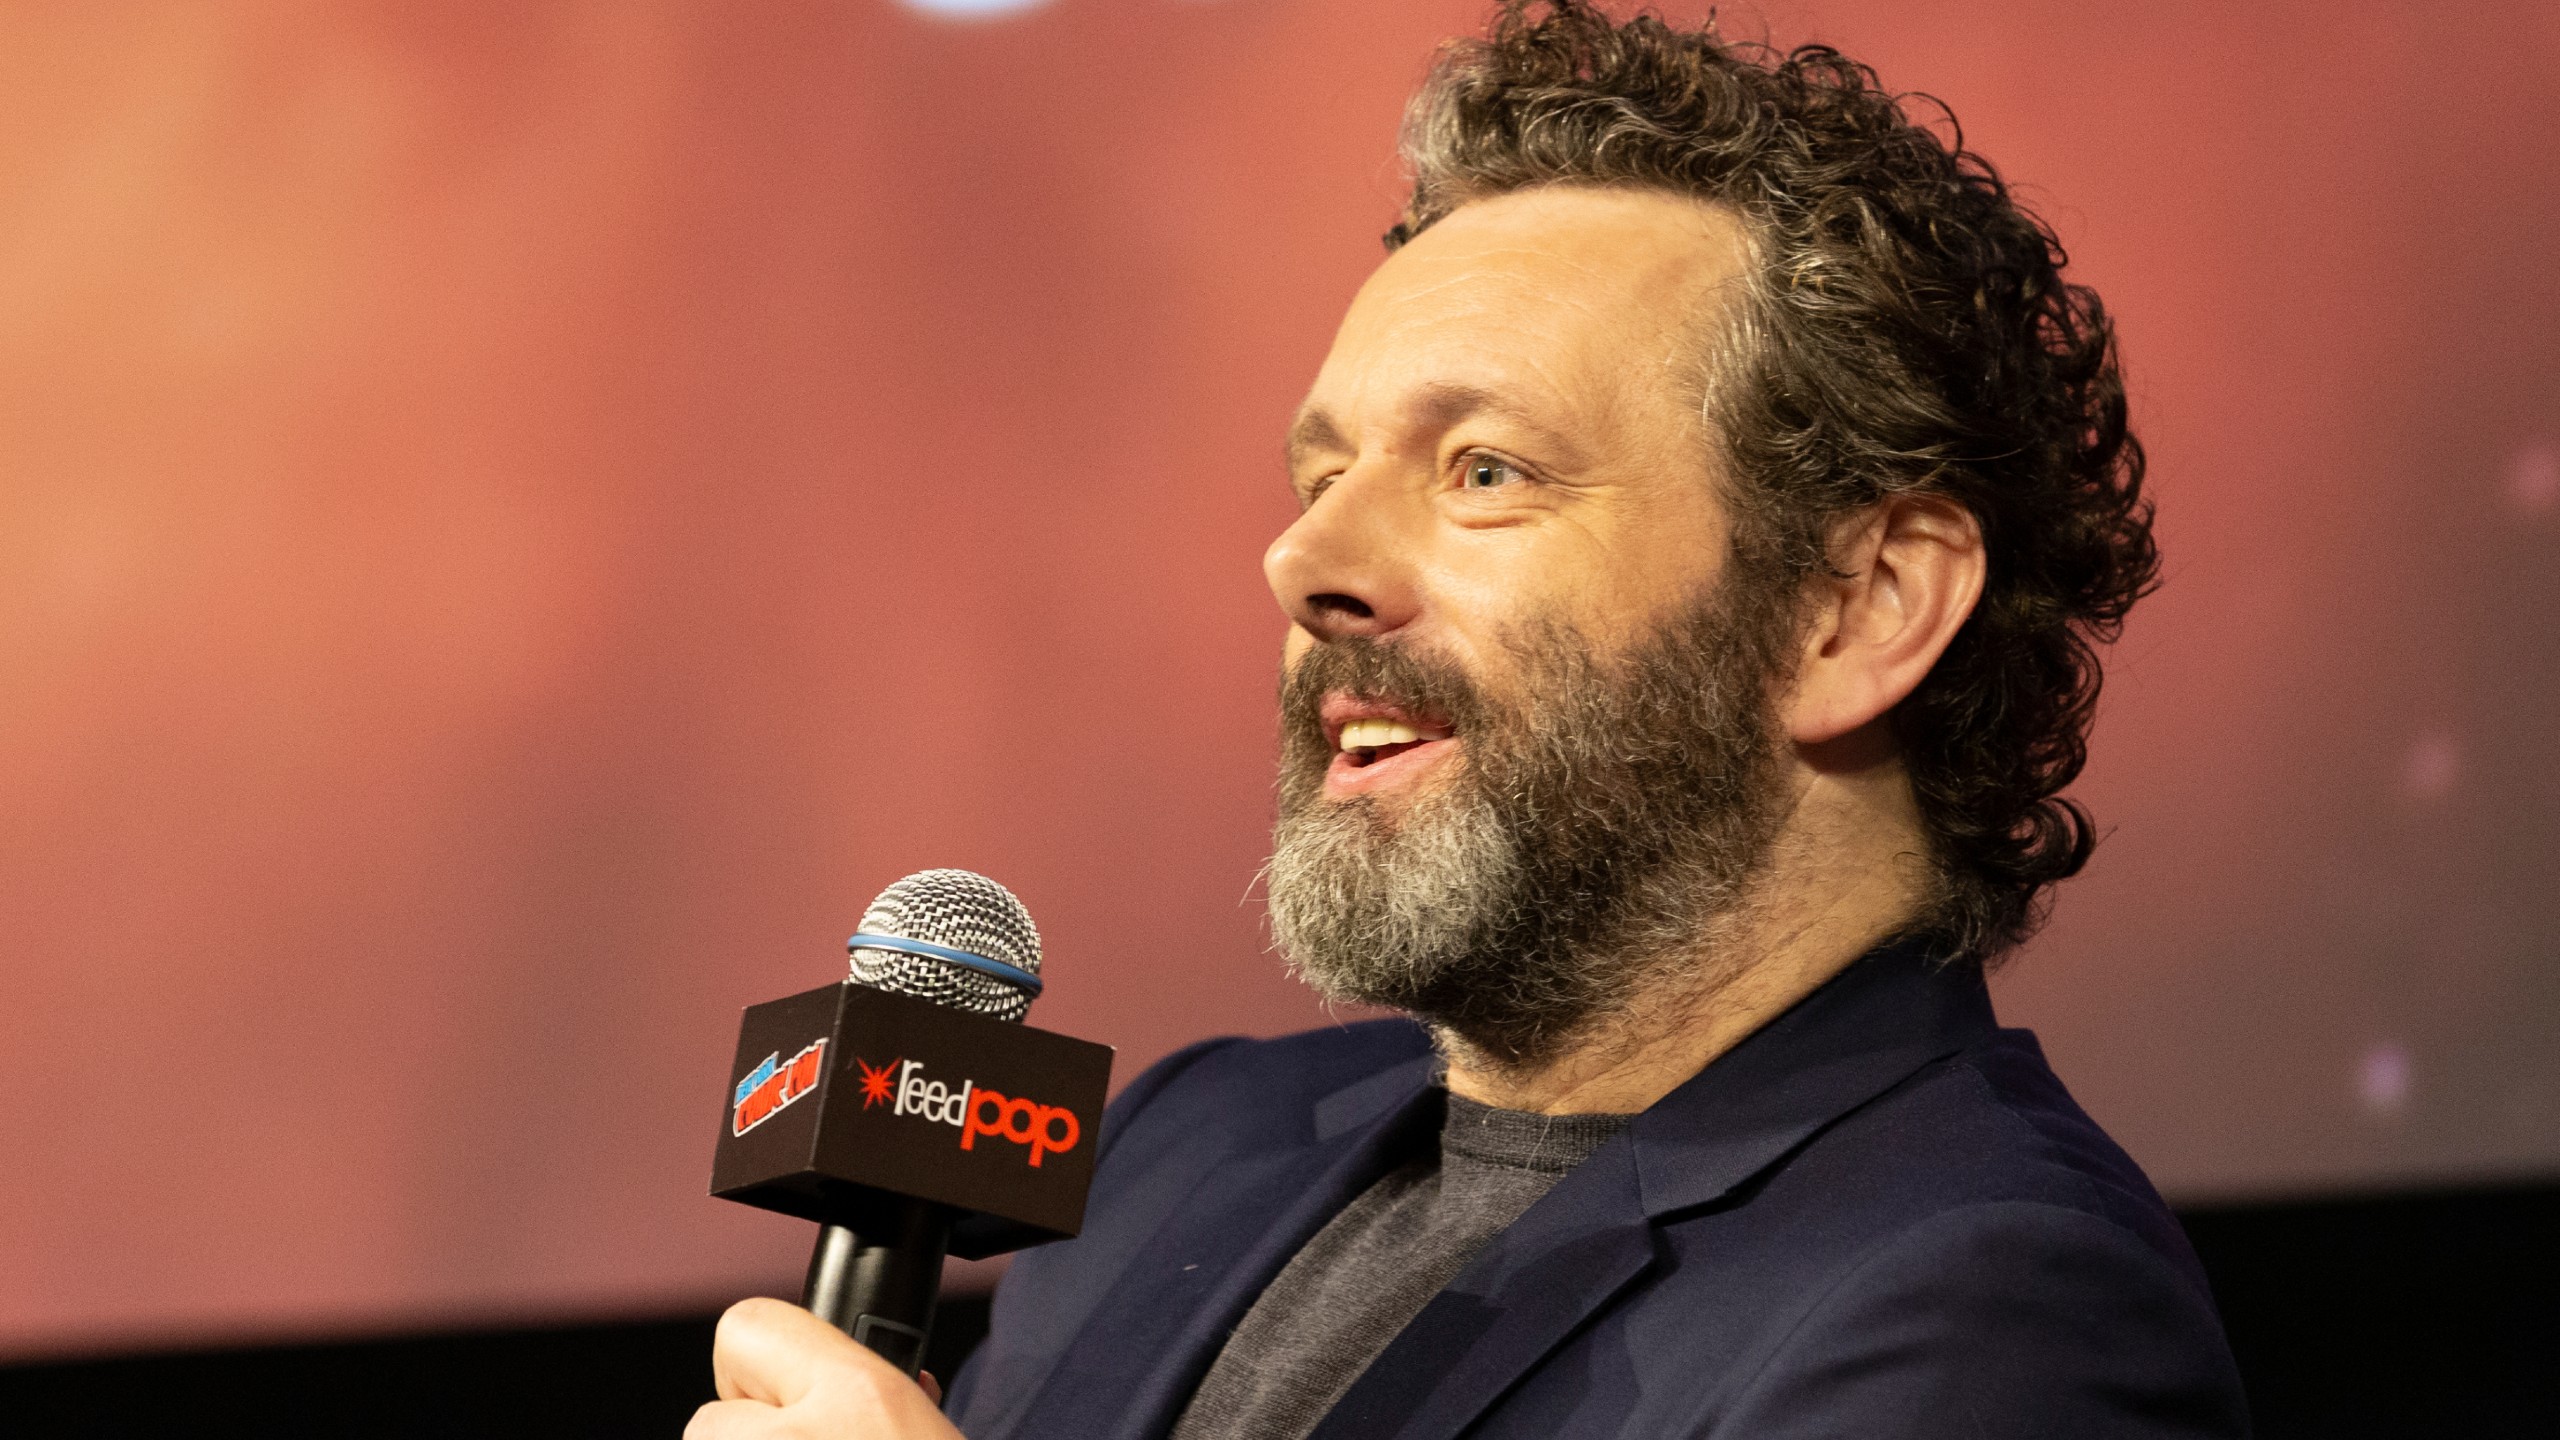 Michael Sheen Becomes Not For Profit Actor To Fund His Charity Work